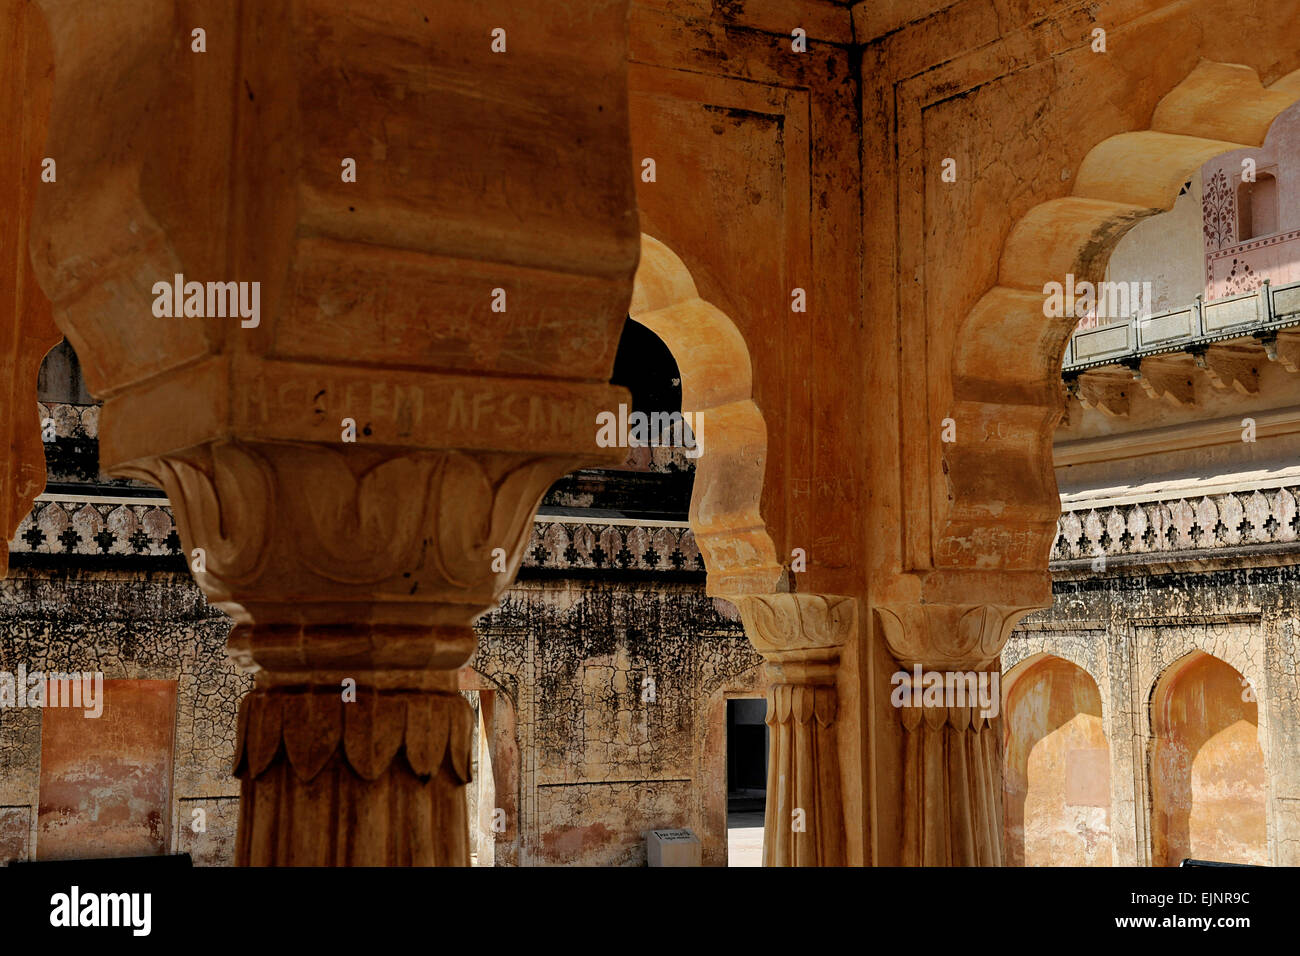 Ornate Indian architecture and buildings at the Amber Amer Fort Palace Jaipur Rajasthan Stock Photo